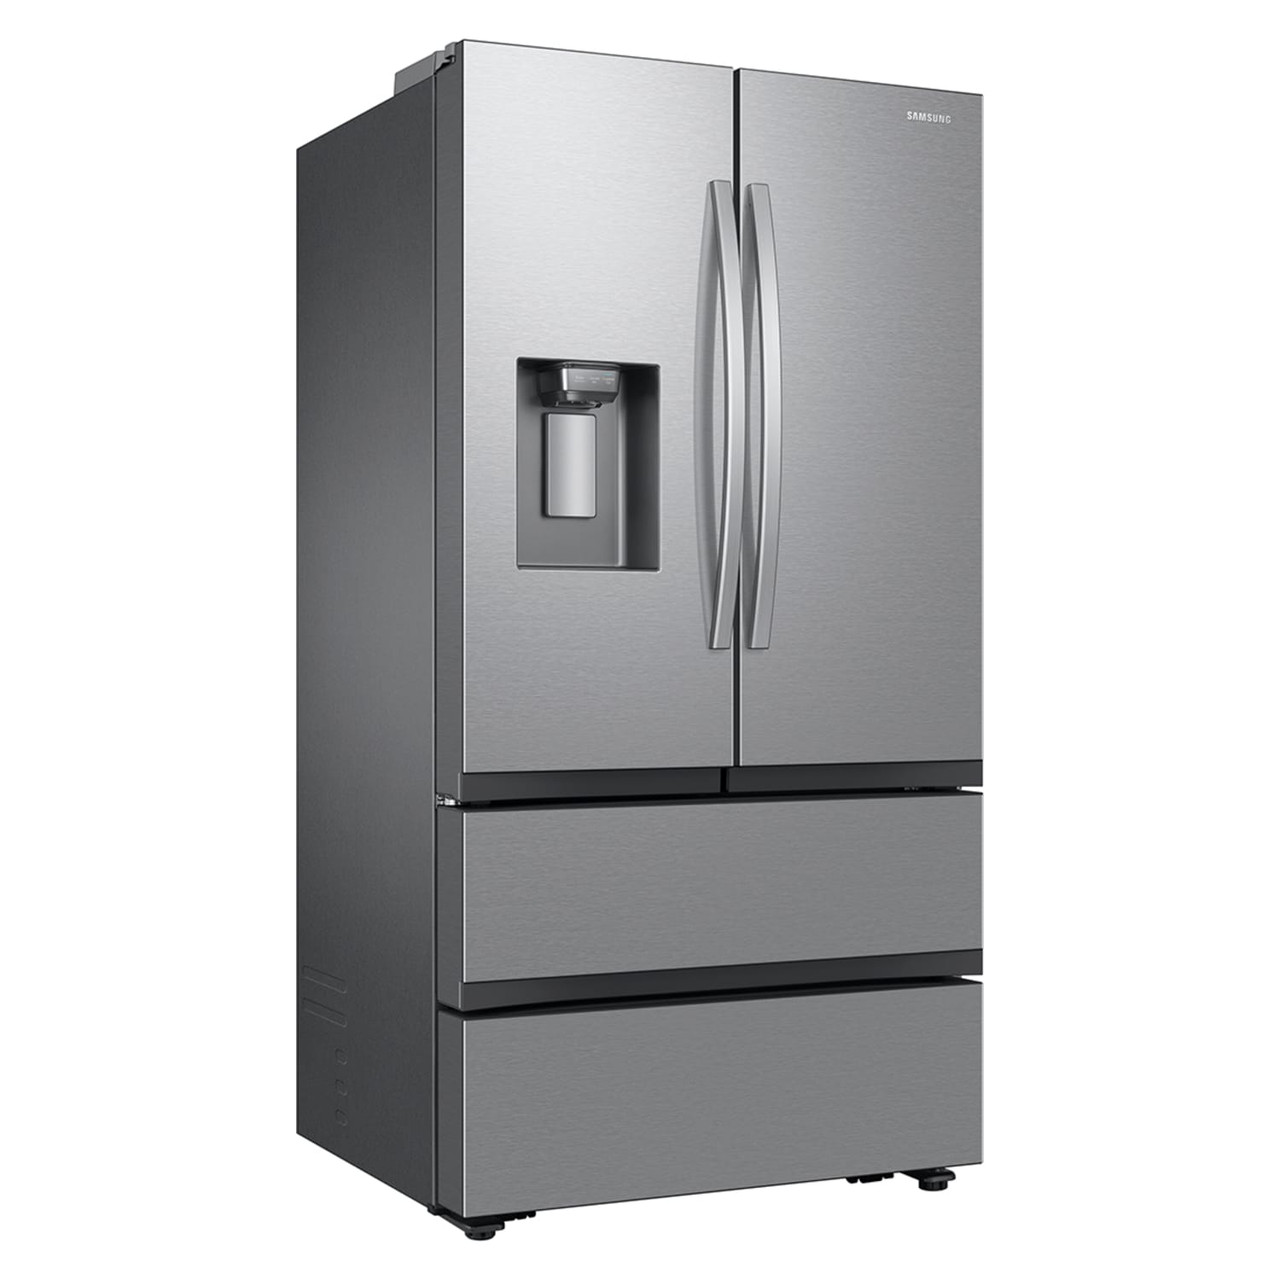 Samsung 25 cu. ft. Mega Capacity Counter Depth 4-Door French Door Refrigerator with Four Types of Ice in Stainless Steel - RF26CG7400SR